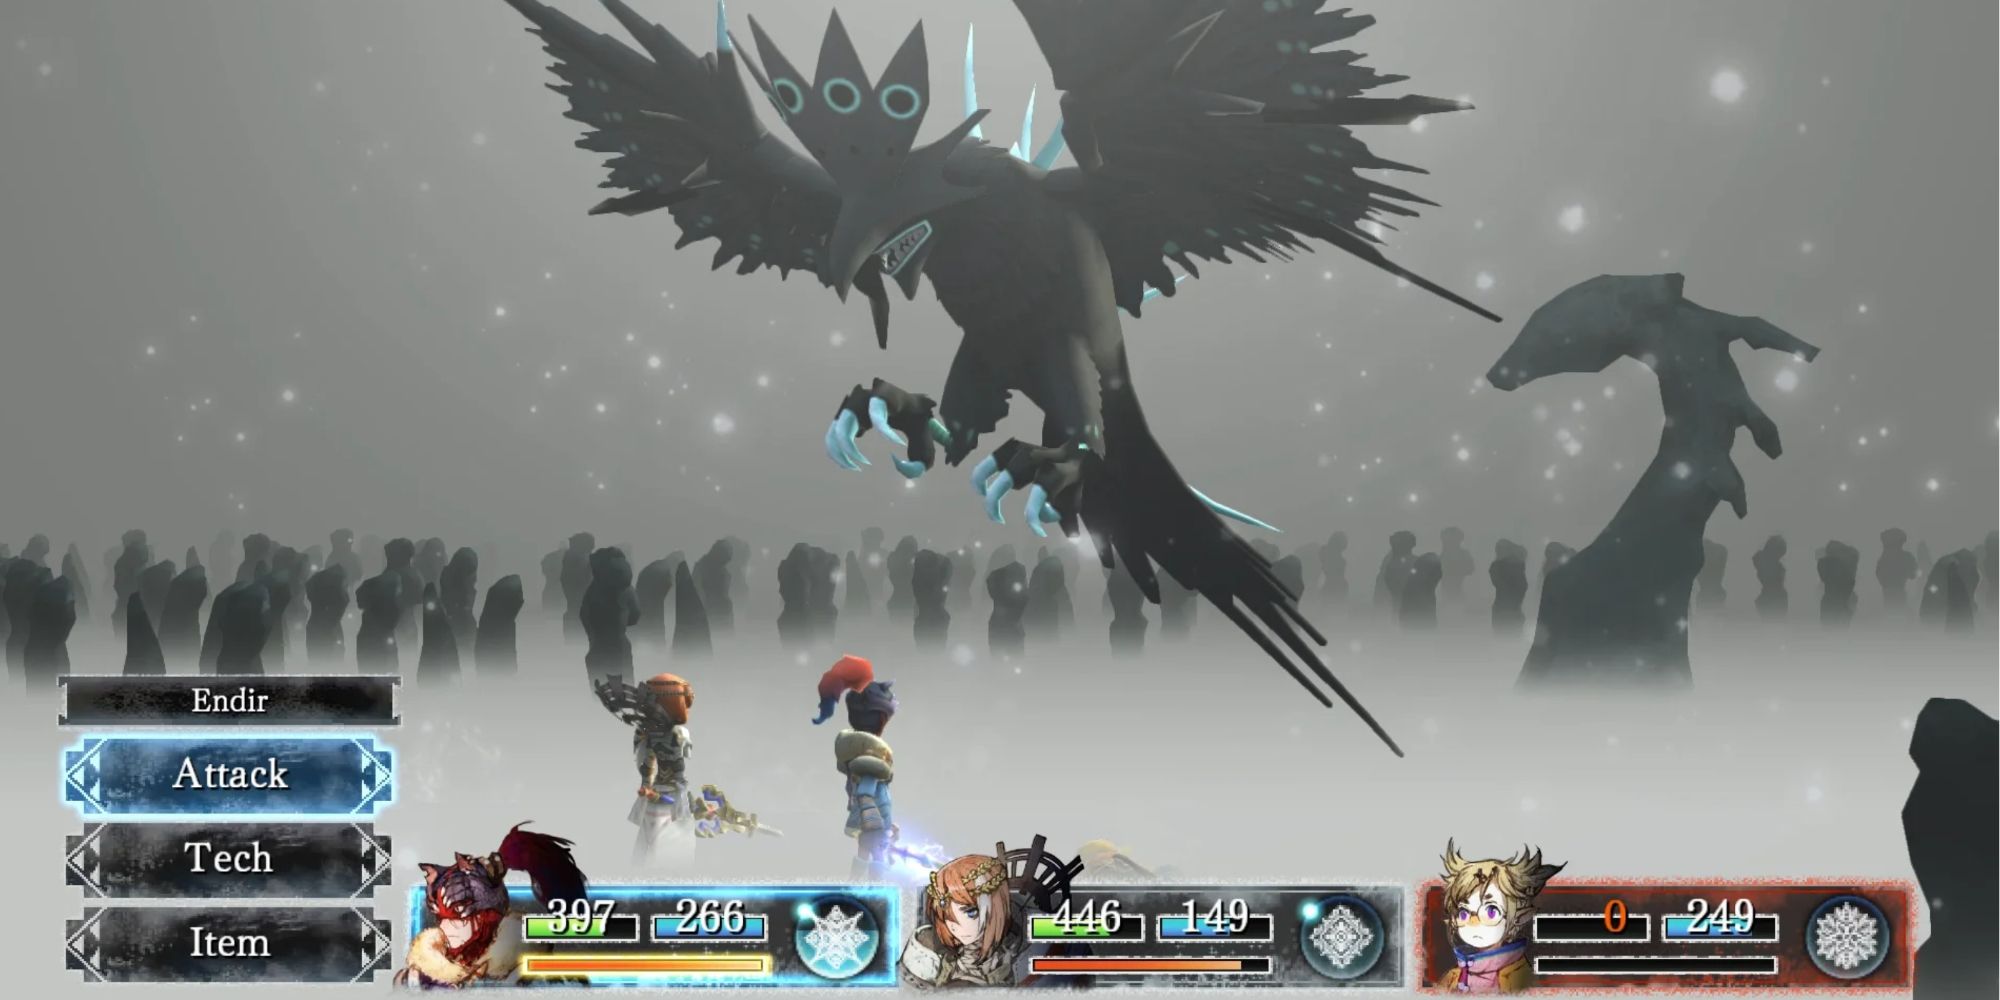 I Am Setsuna is an homage to old-school RPGs